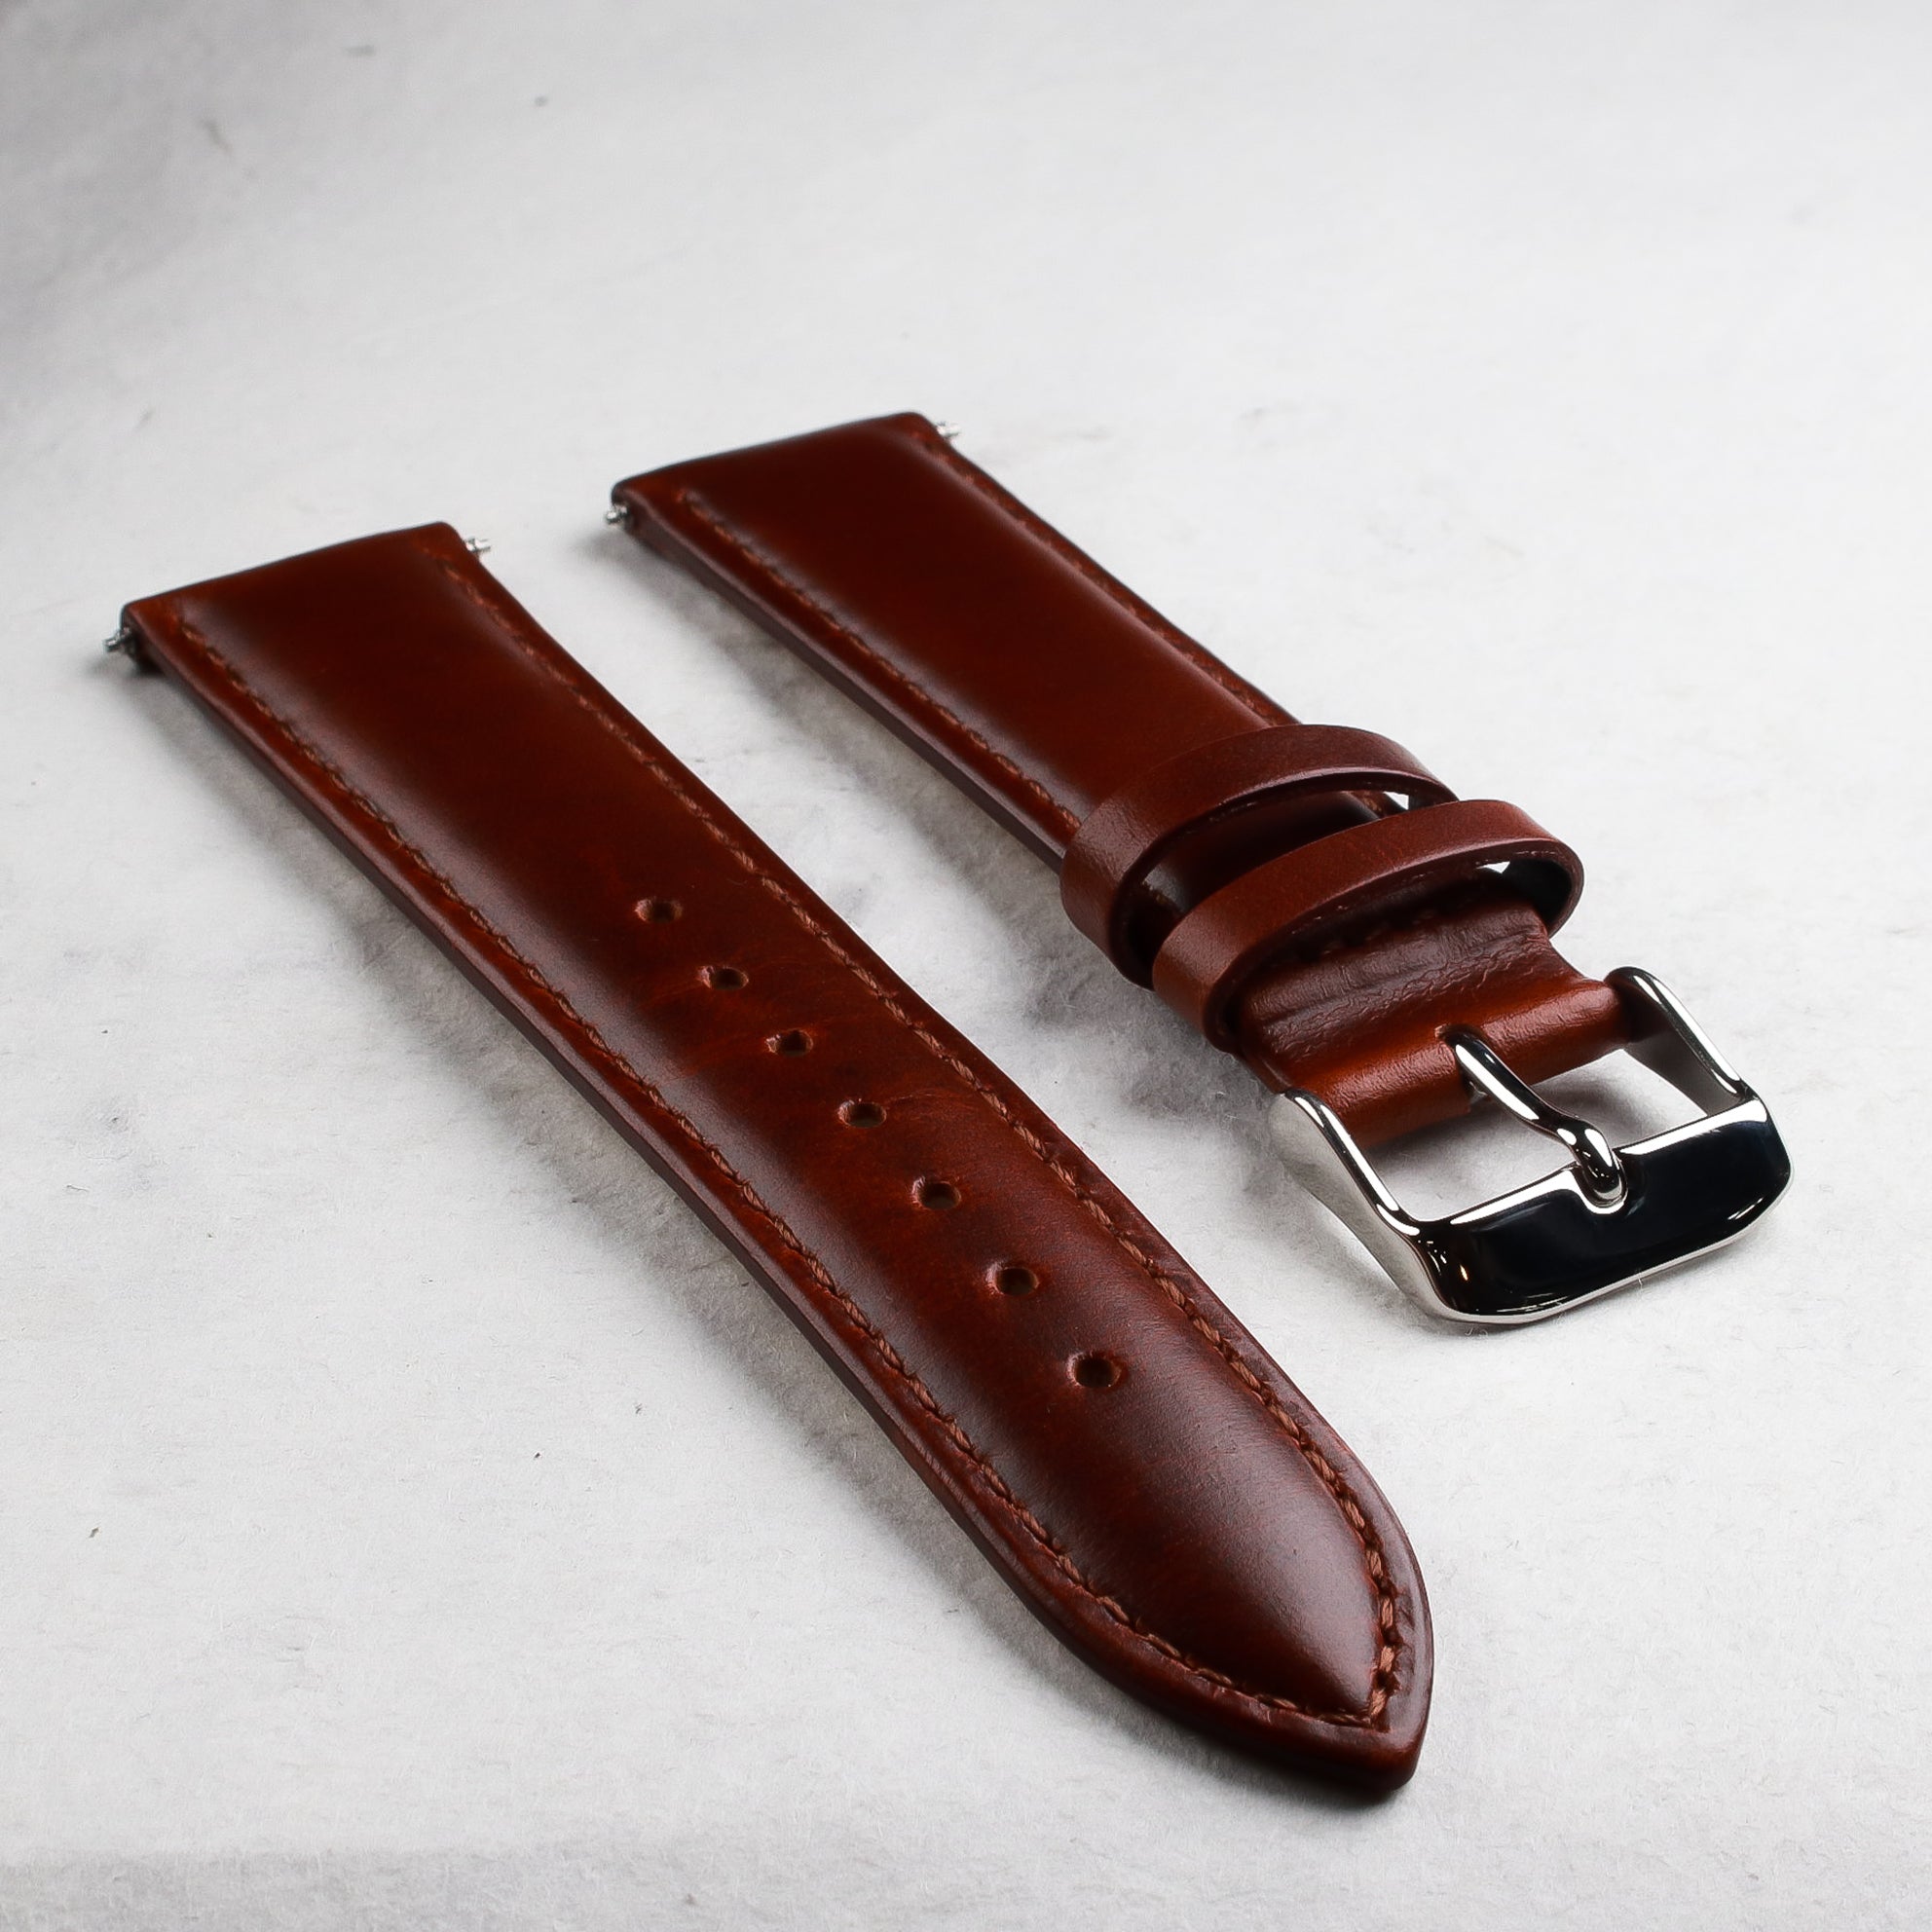 Calfskin Leather Strap - Wancher Watch Wancher Watch Brown Wancher Watch Calfskin Leather Strap {{ Automatic Watch {{ Watch }} }} {{ Japan }}Wancher 20mm Calfskin Leather Strap with Silver Clasp and Quick-release pins Closure - premium quality leather strap for watches.